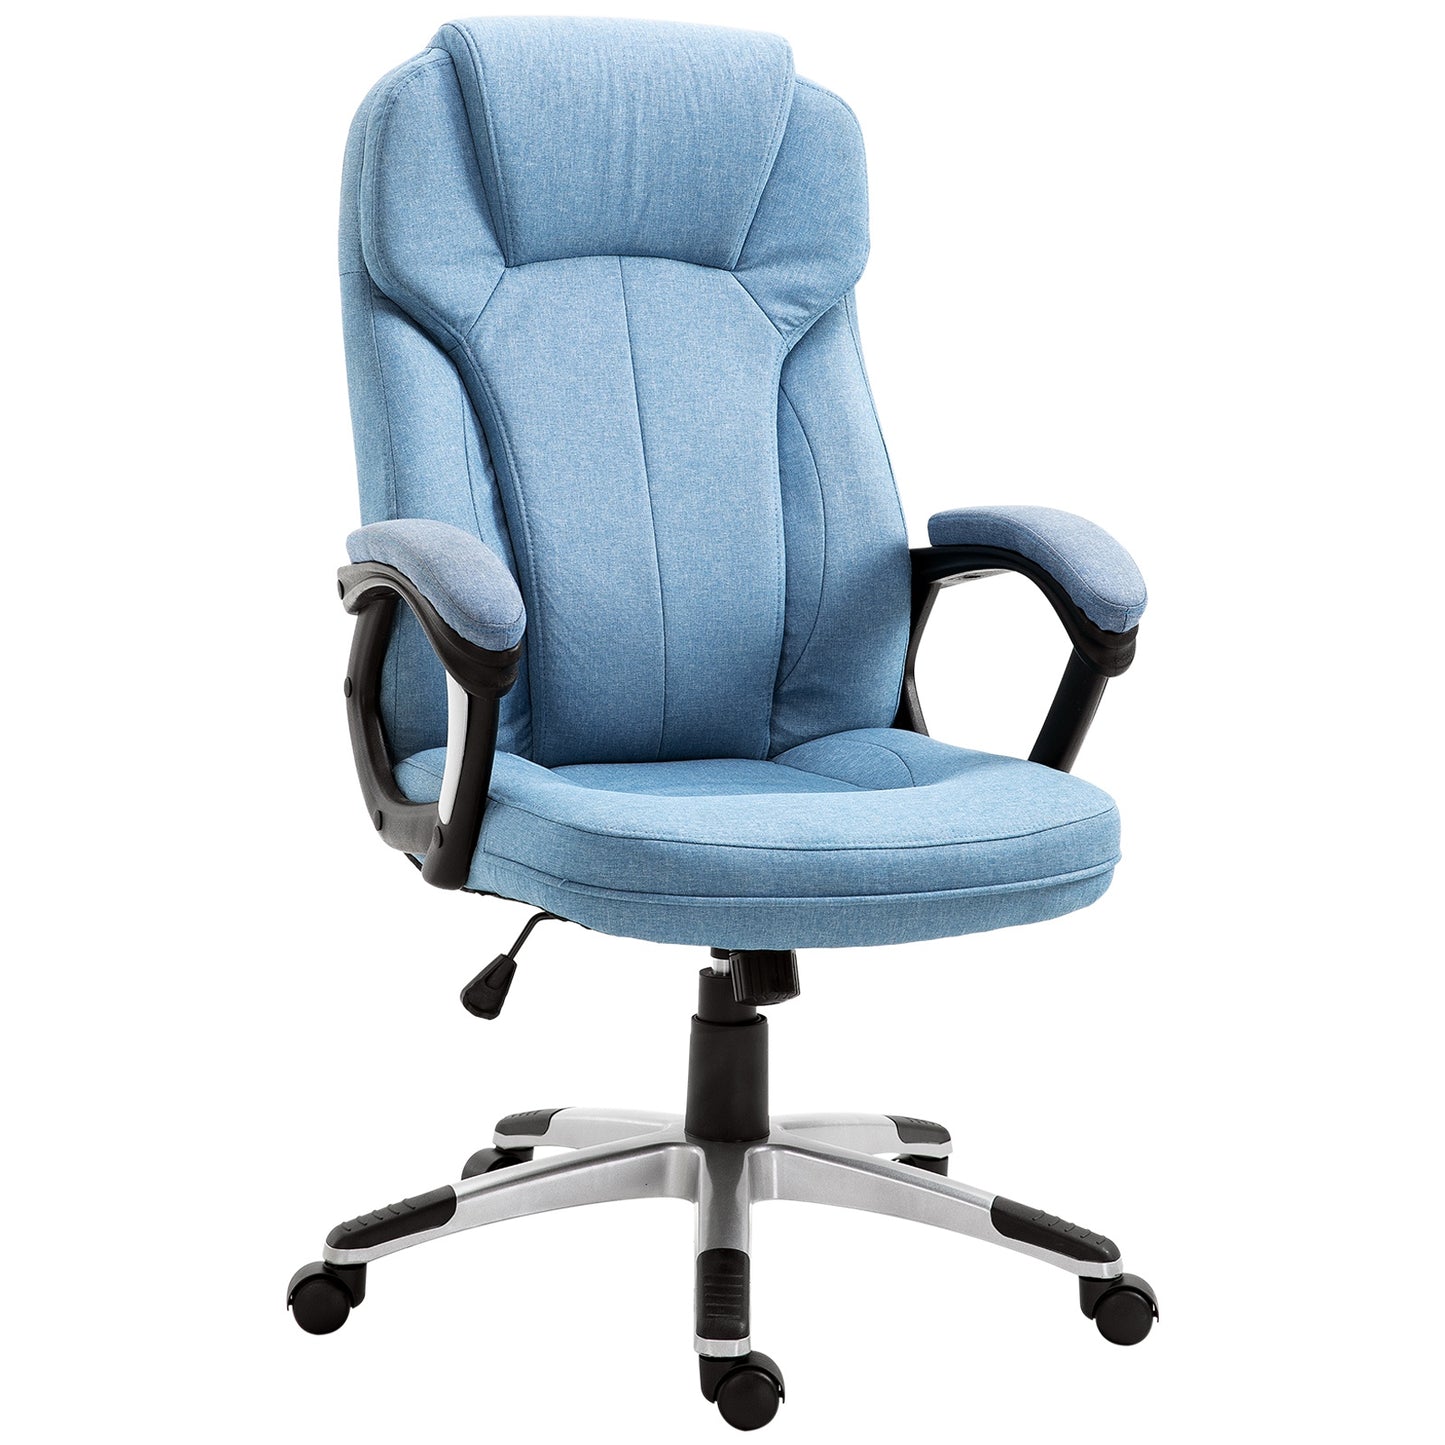 Vinsetto Executive Office Gaming Chair Linen Rocking Seat w/ Adjustable Padded Seat & Wheels in Blue